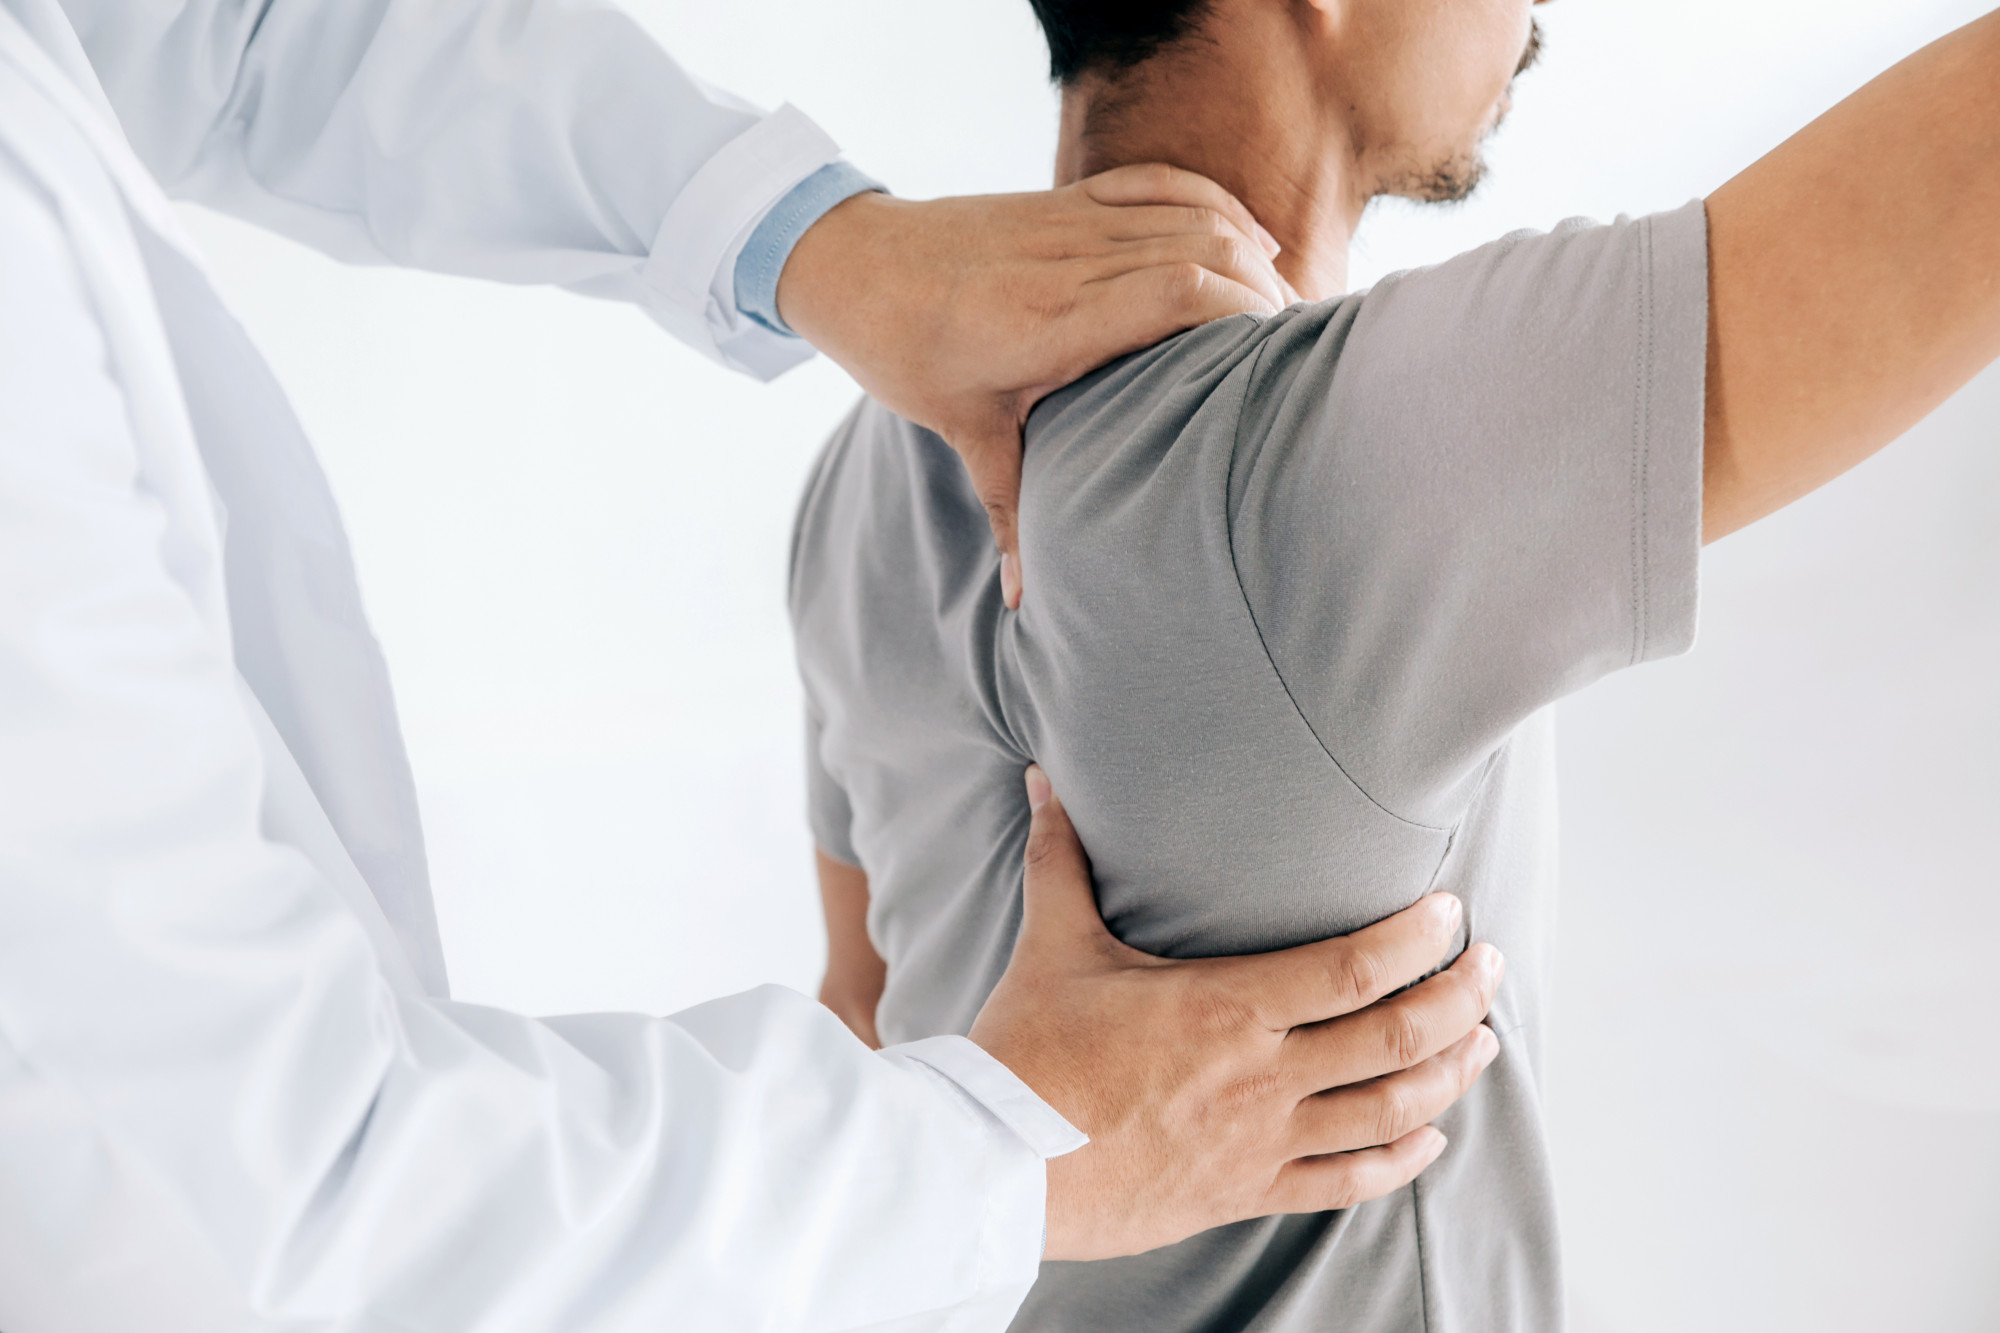 Chiropractor in Libertyville, IL